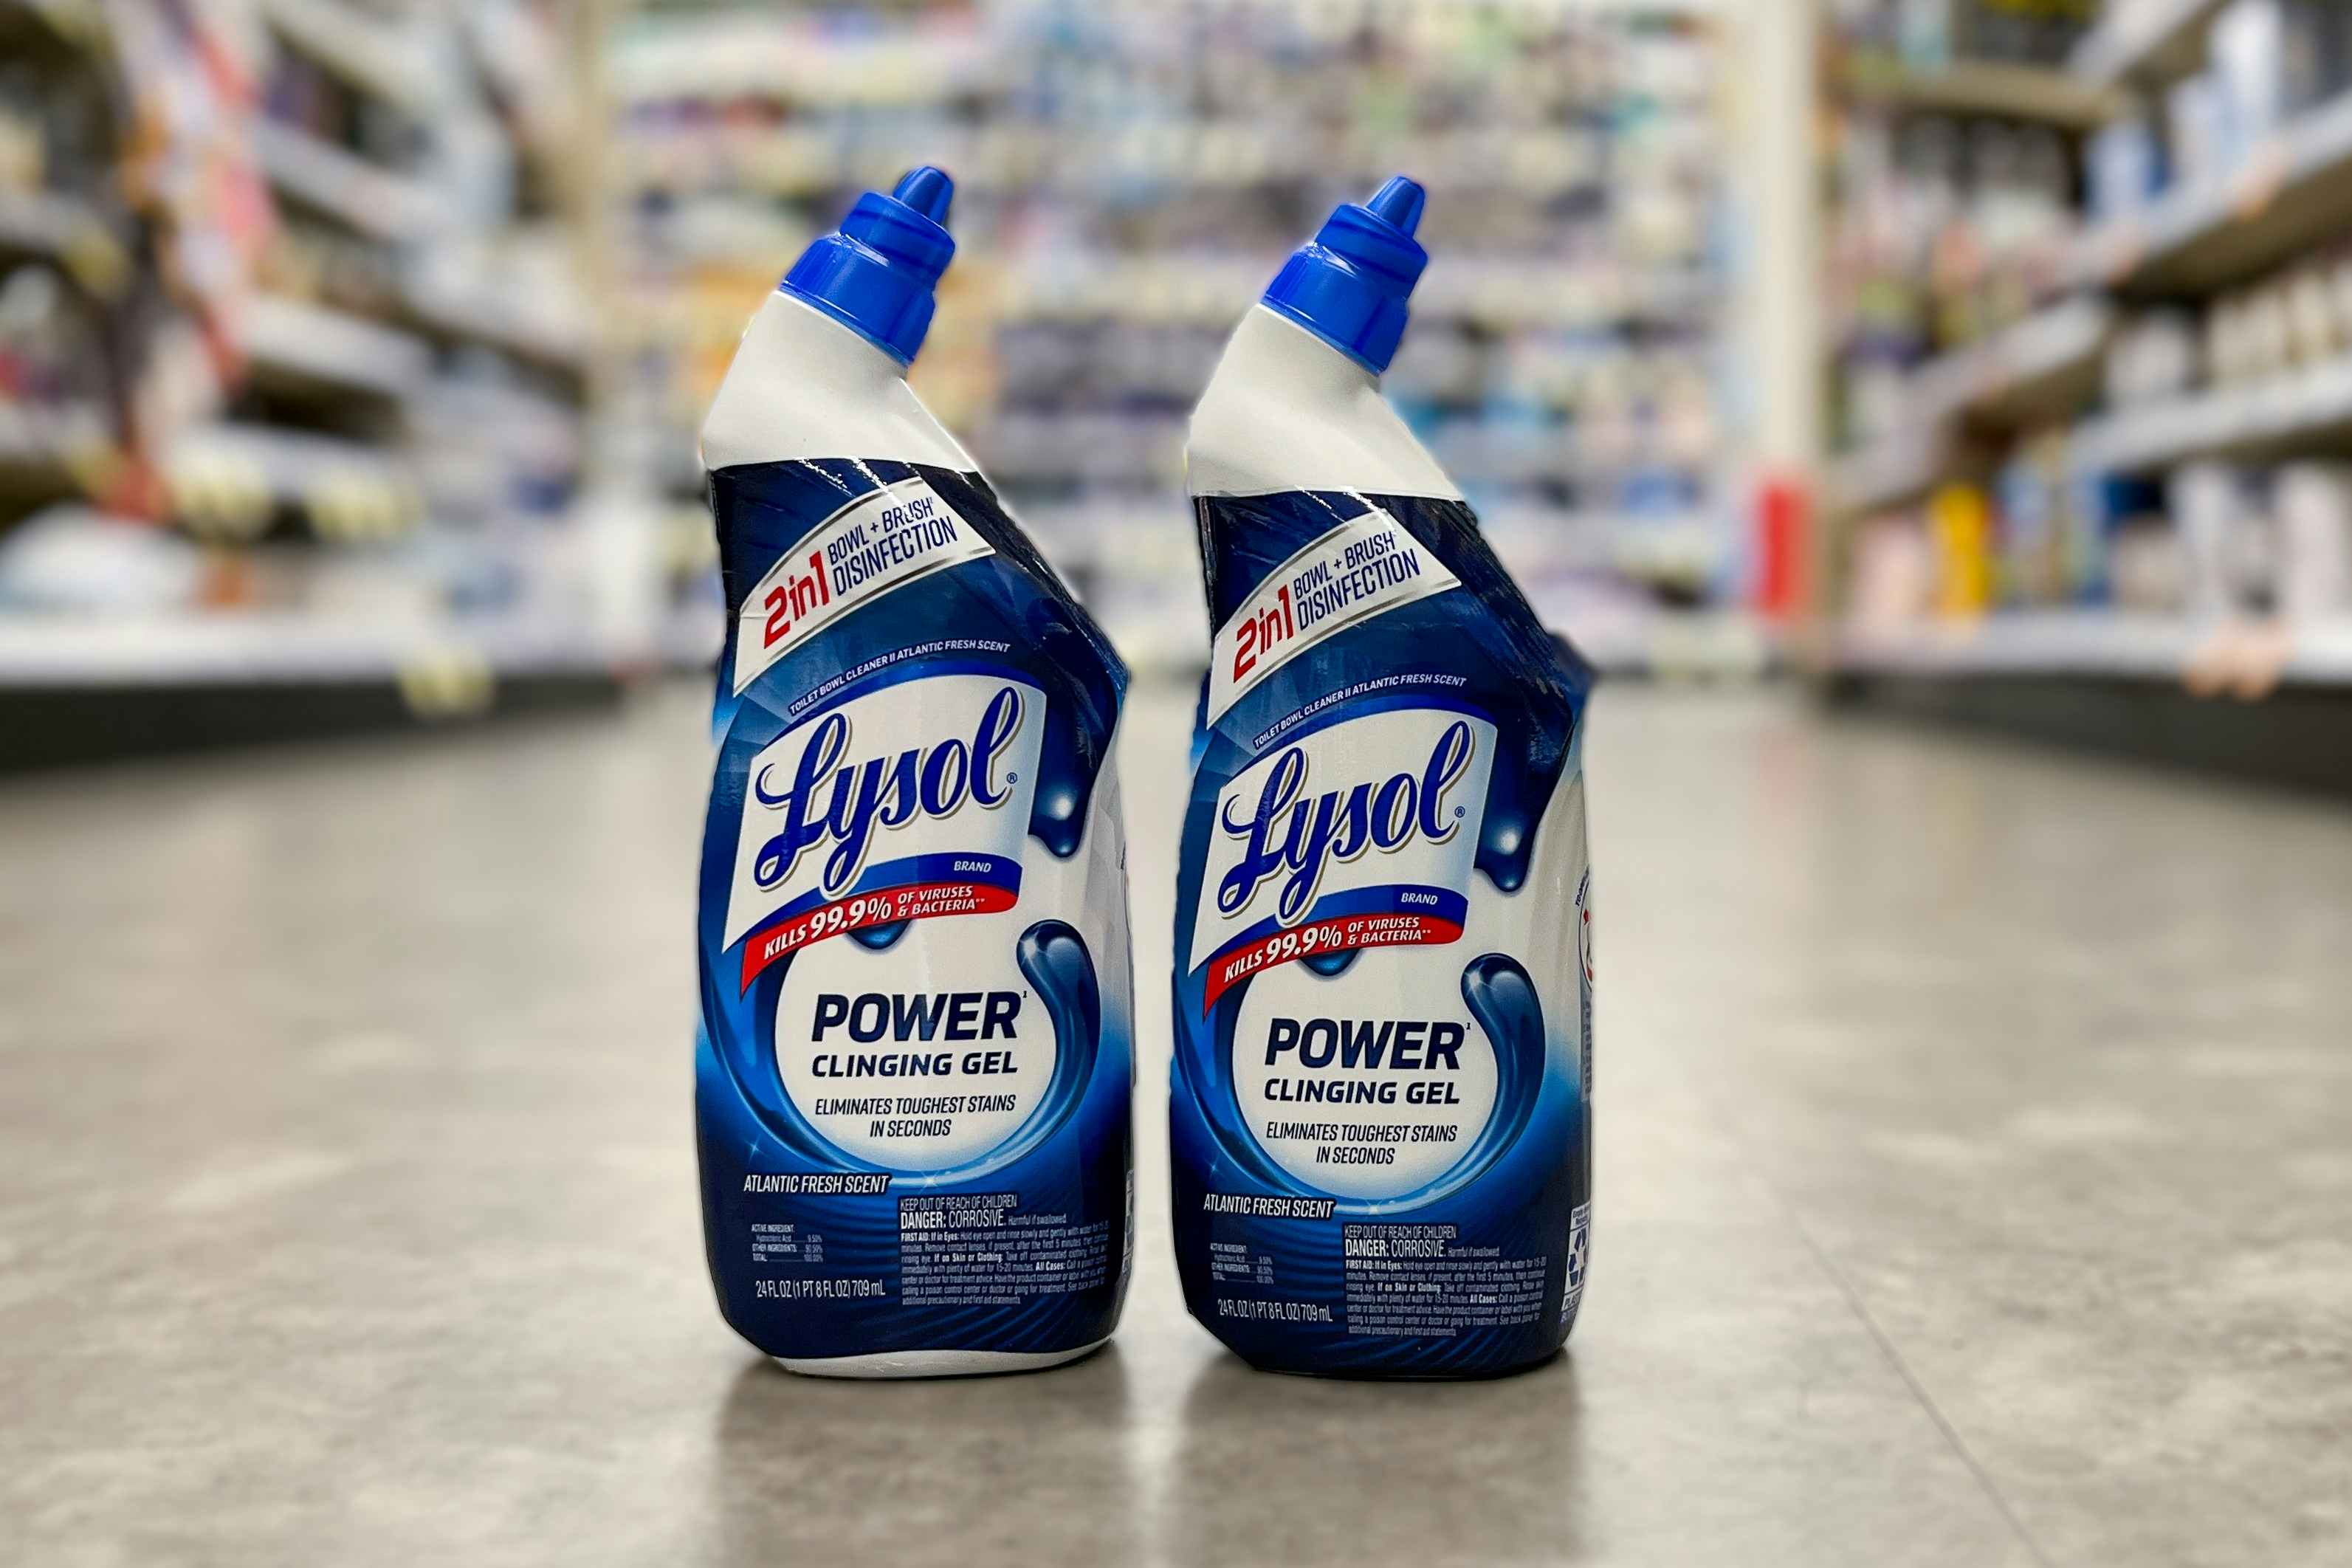 Lysol Toilet Bowl Cleaner Gel 2-Pack, as Low as $3.66 on Amazon